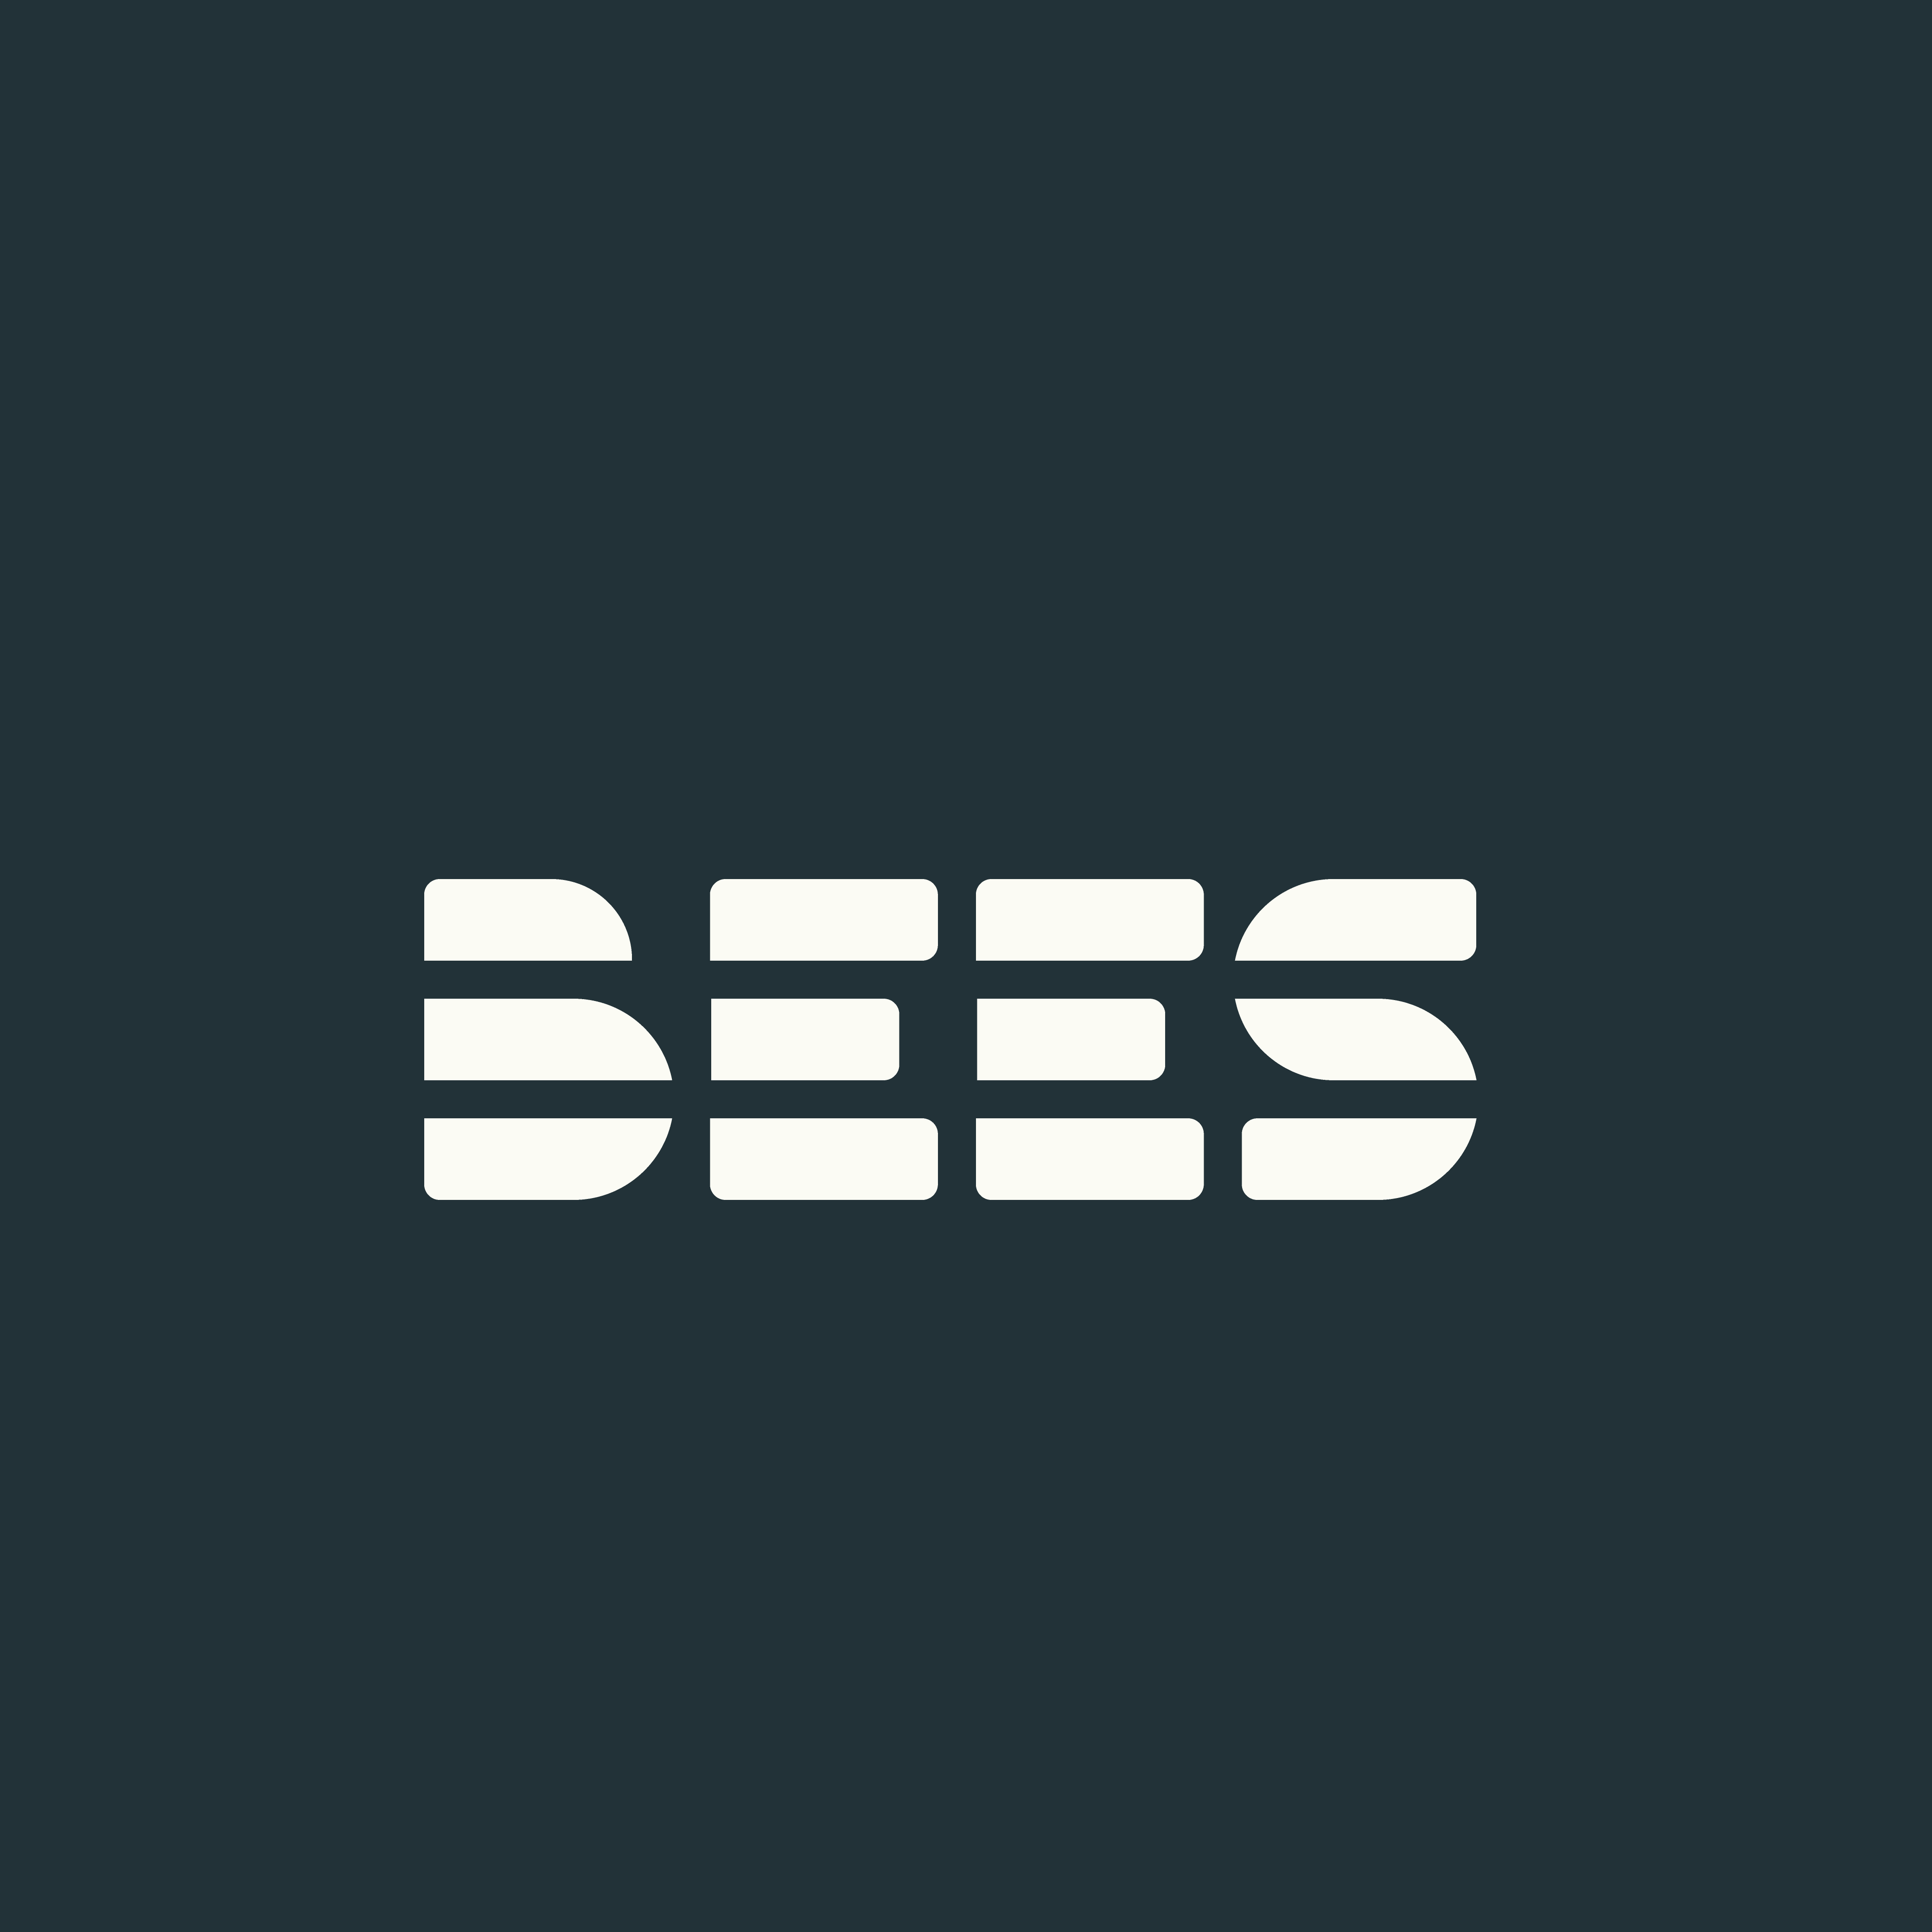 Case Study  Building A Value Proposition For Bees